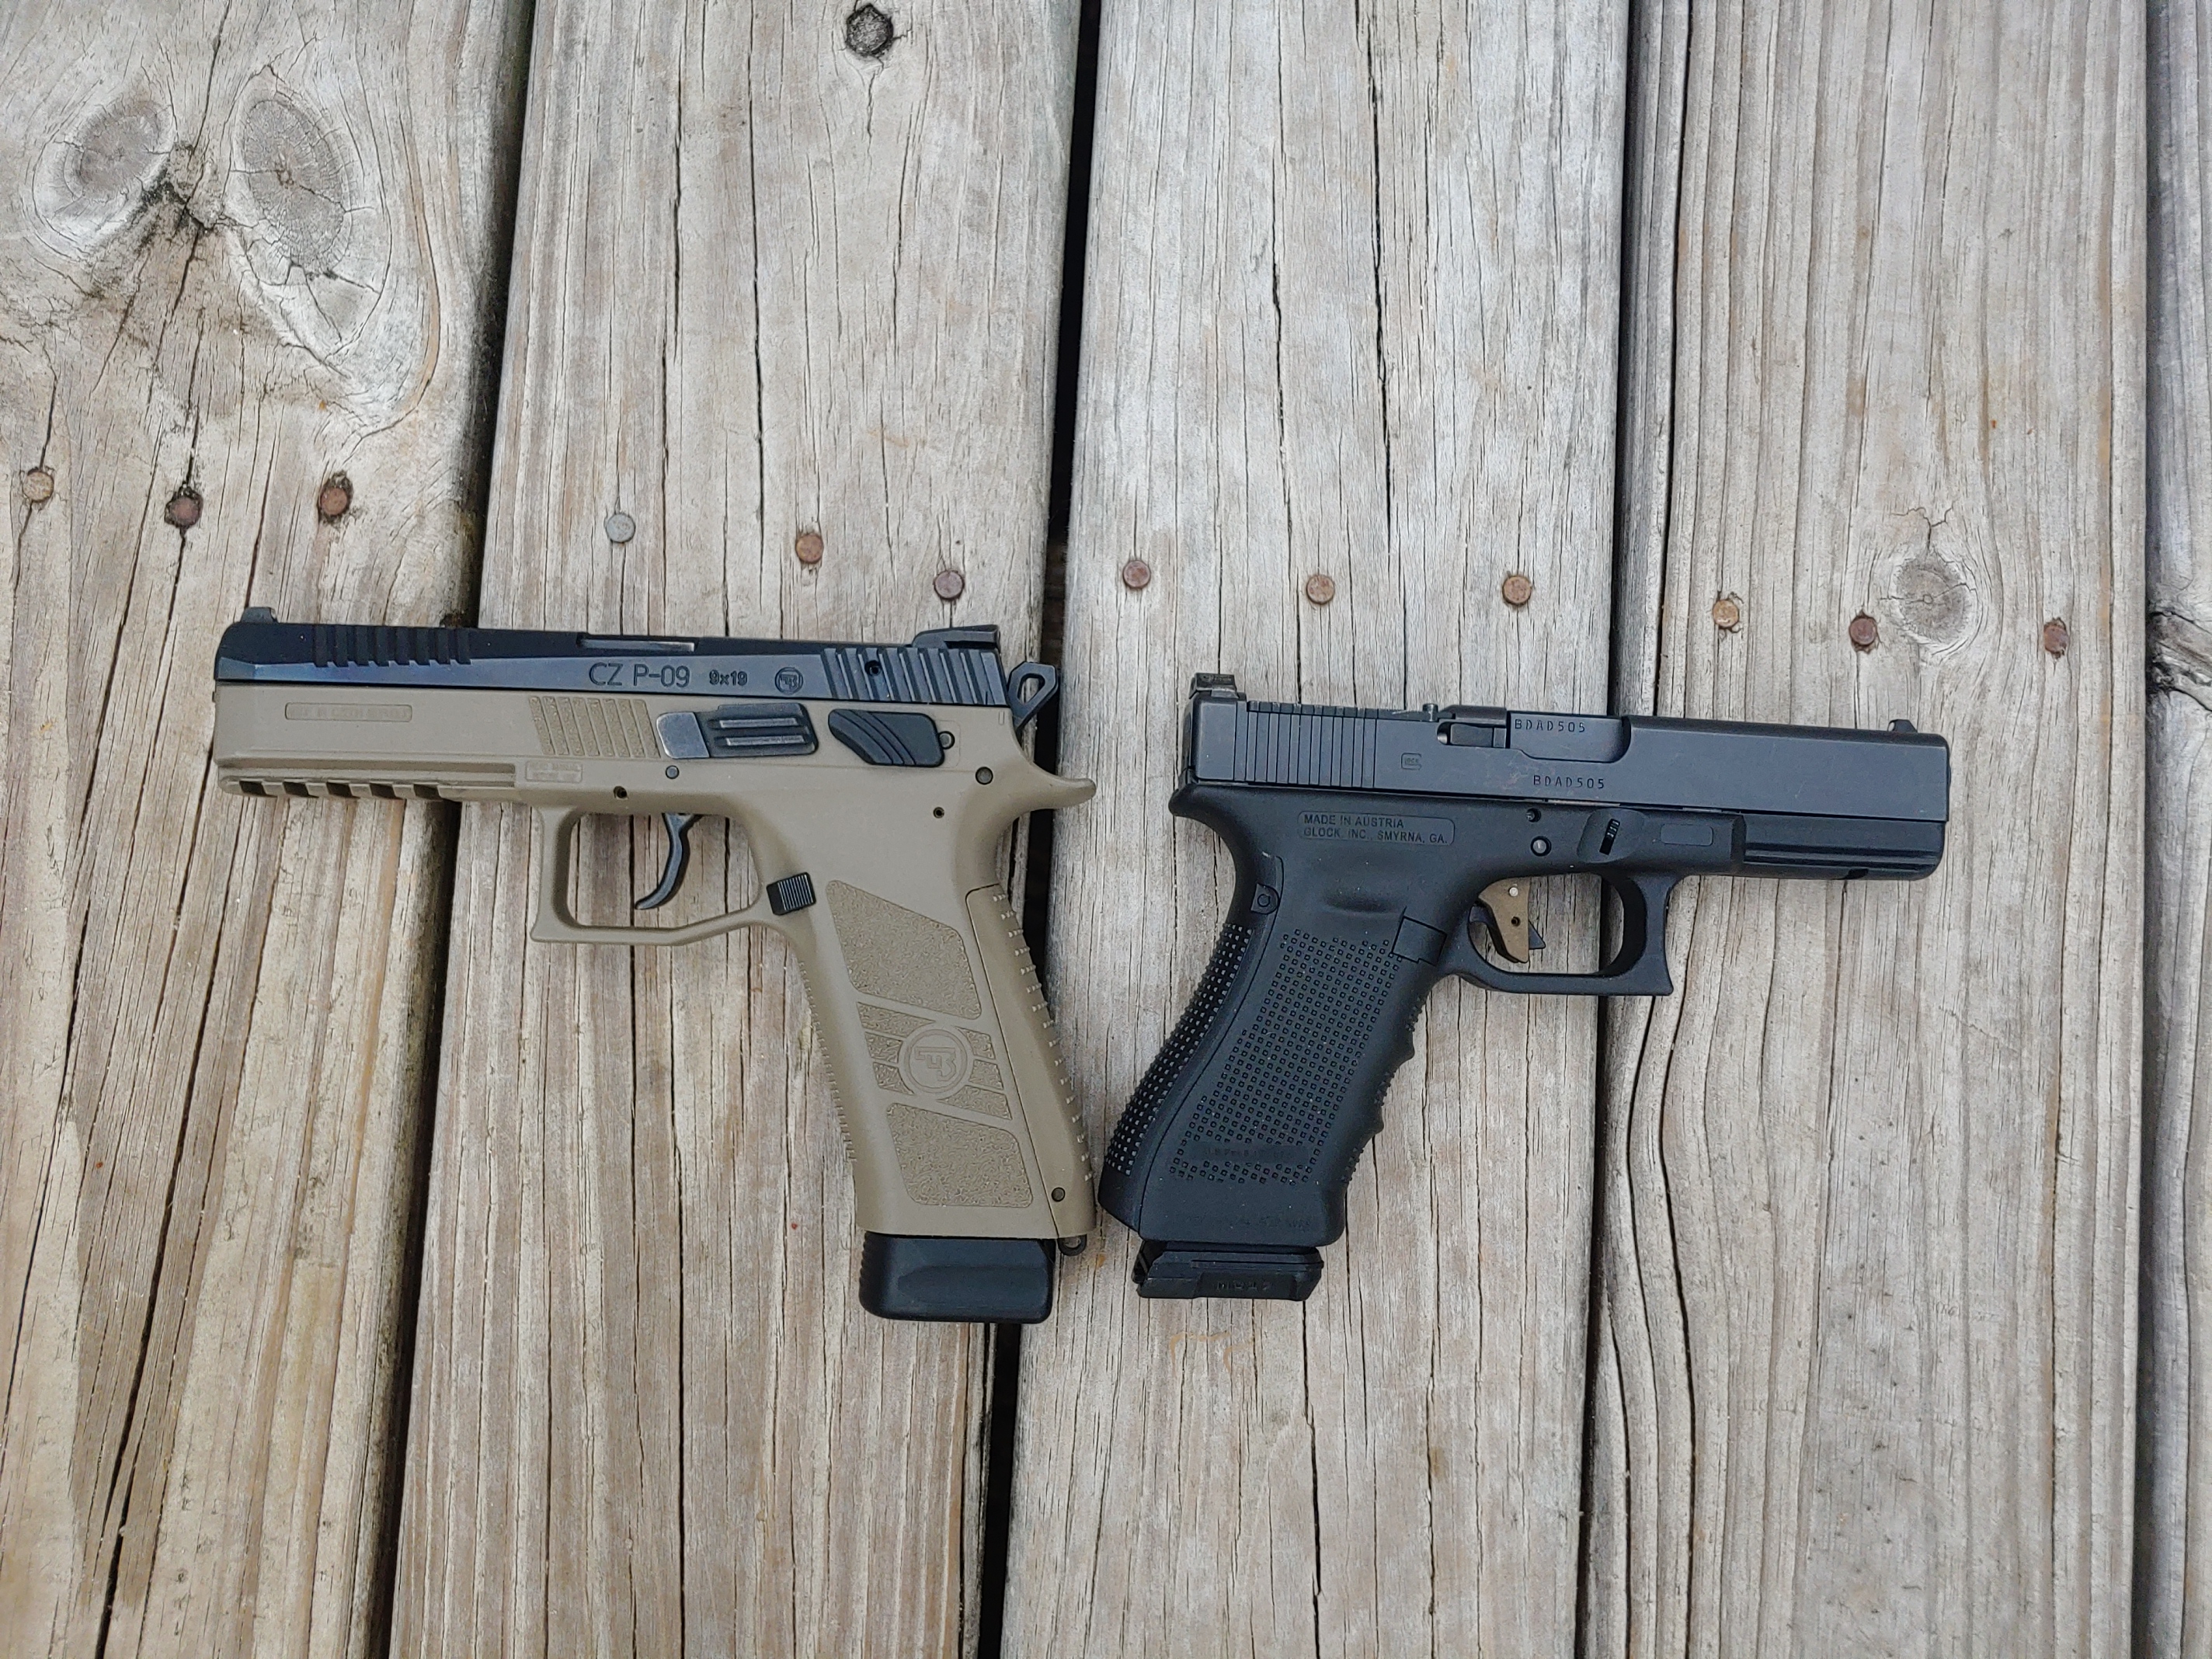 Glock Vs Cz: Stacking The G17 Up Against The P09